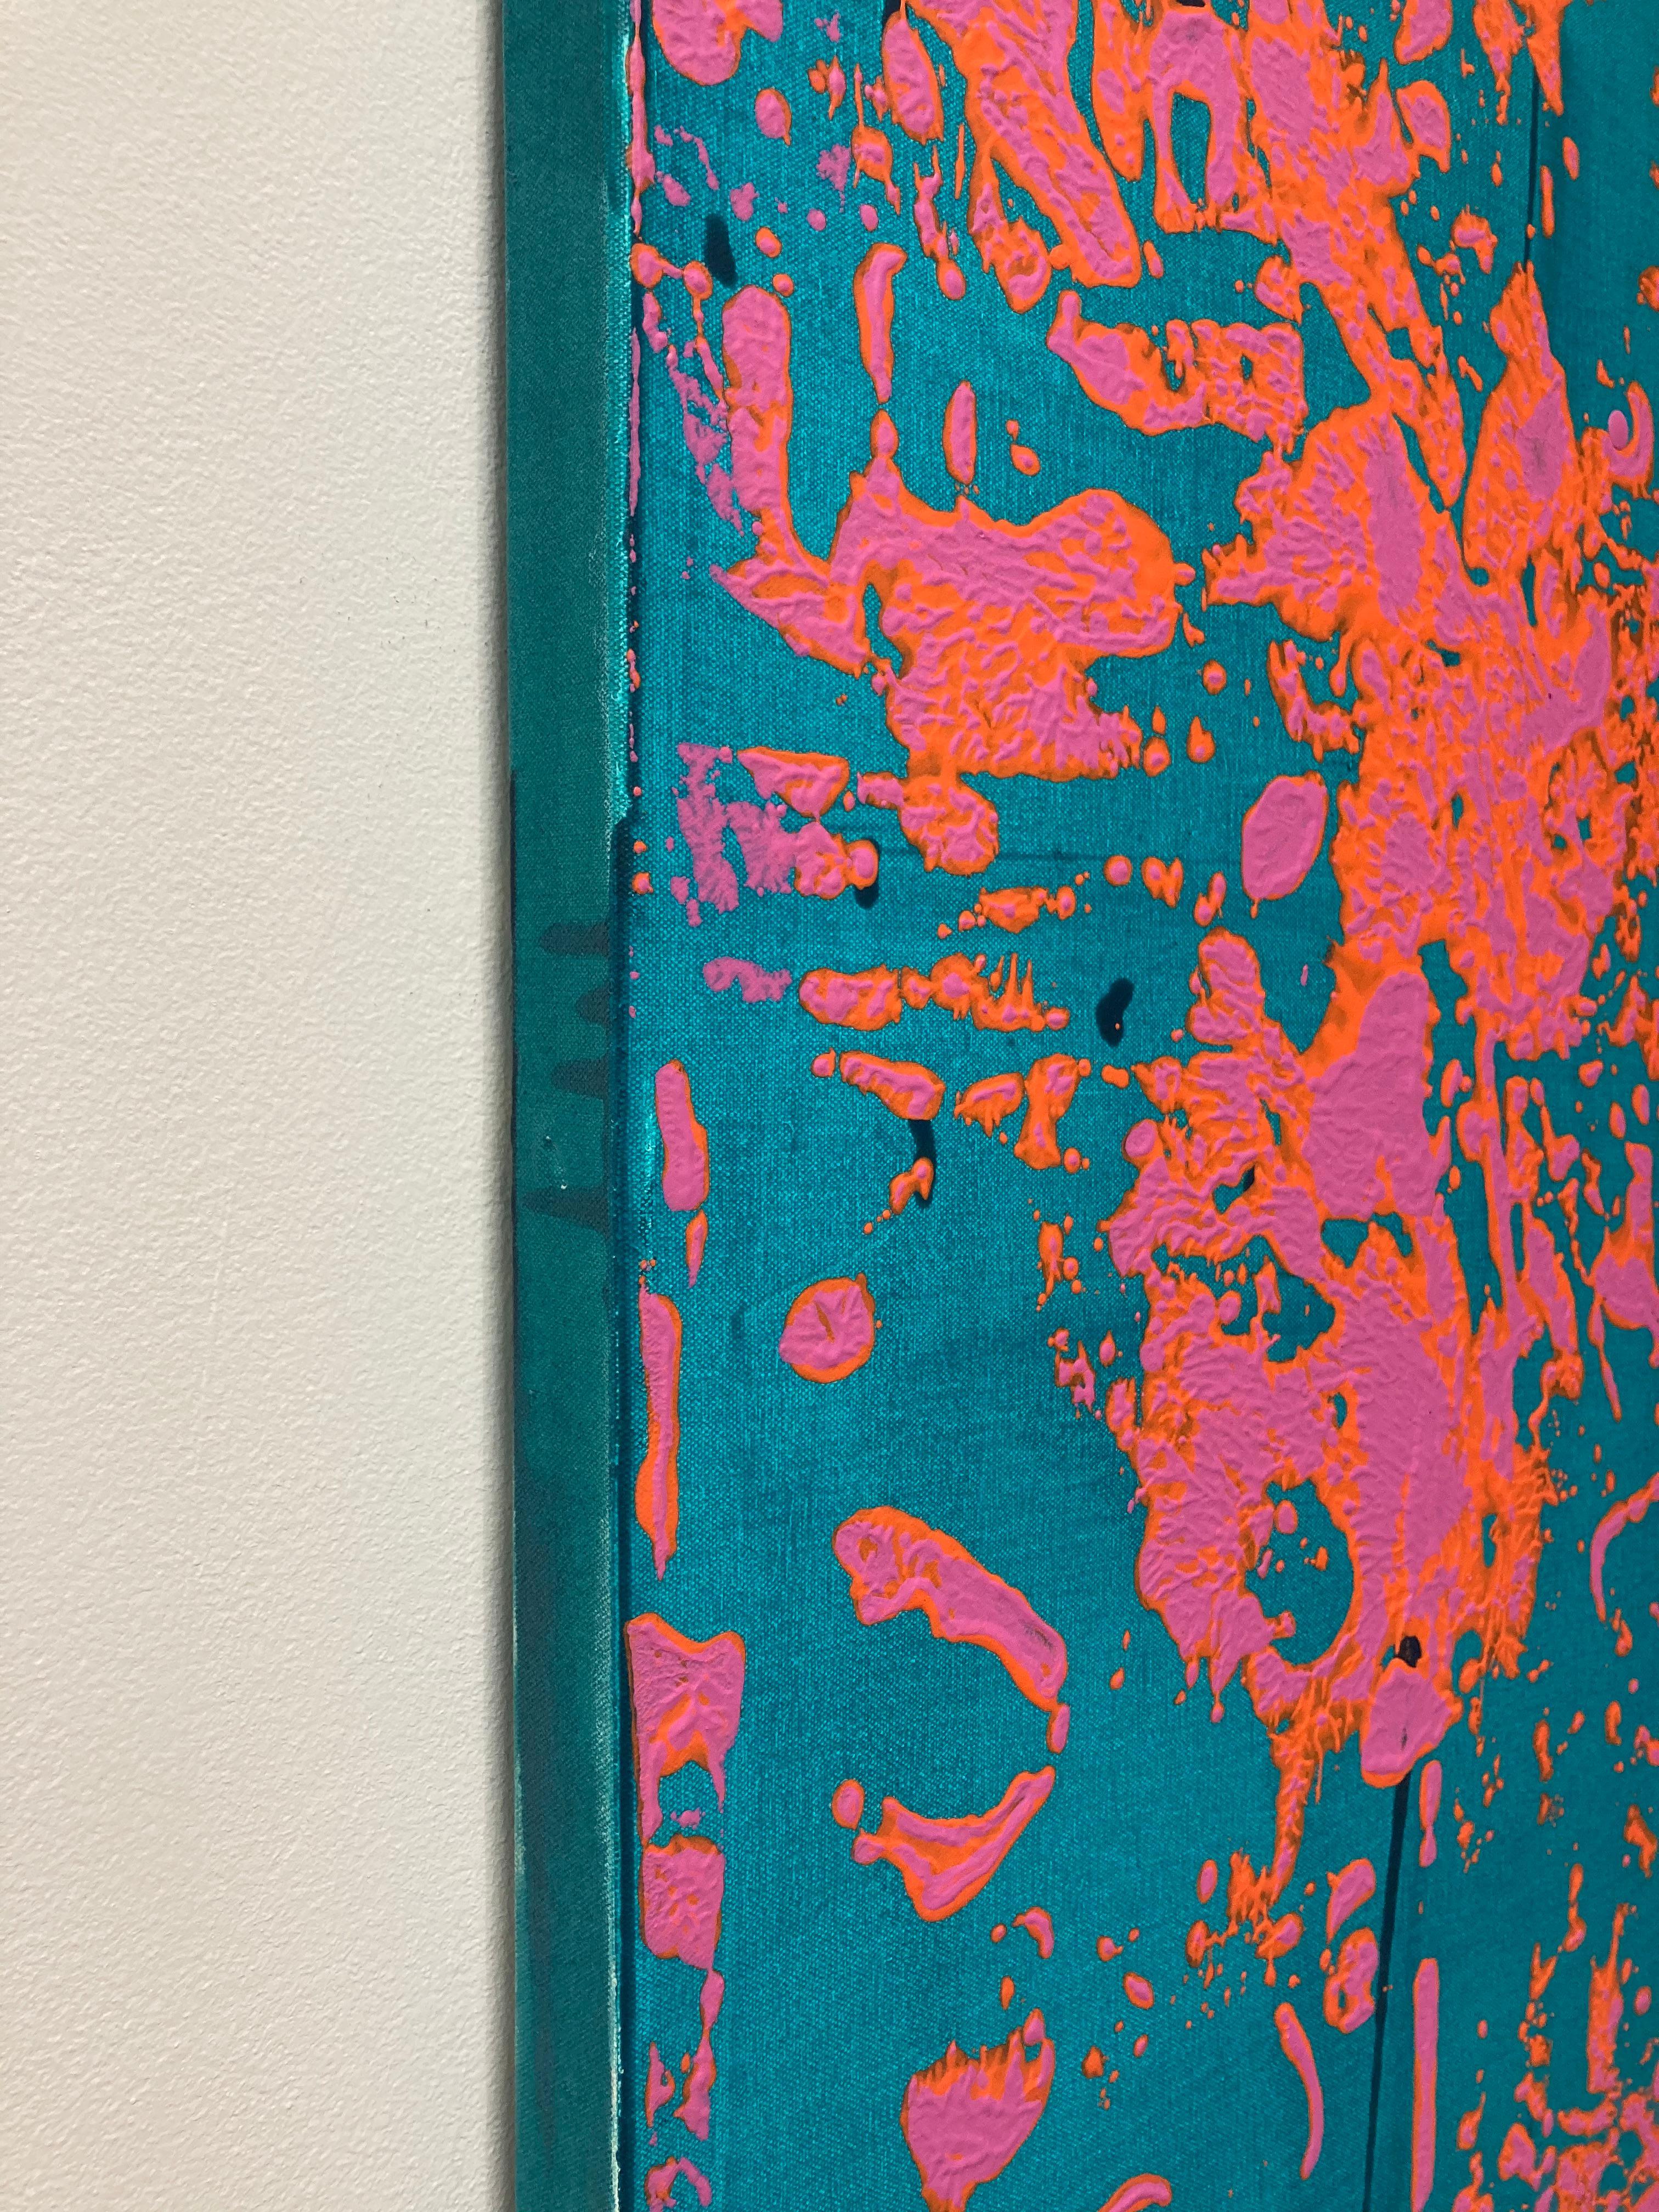 P18-0440, Vertical Abstract Painting, Teal Blue Green, Bright Pink, Orange 4